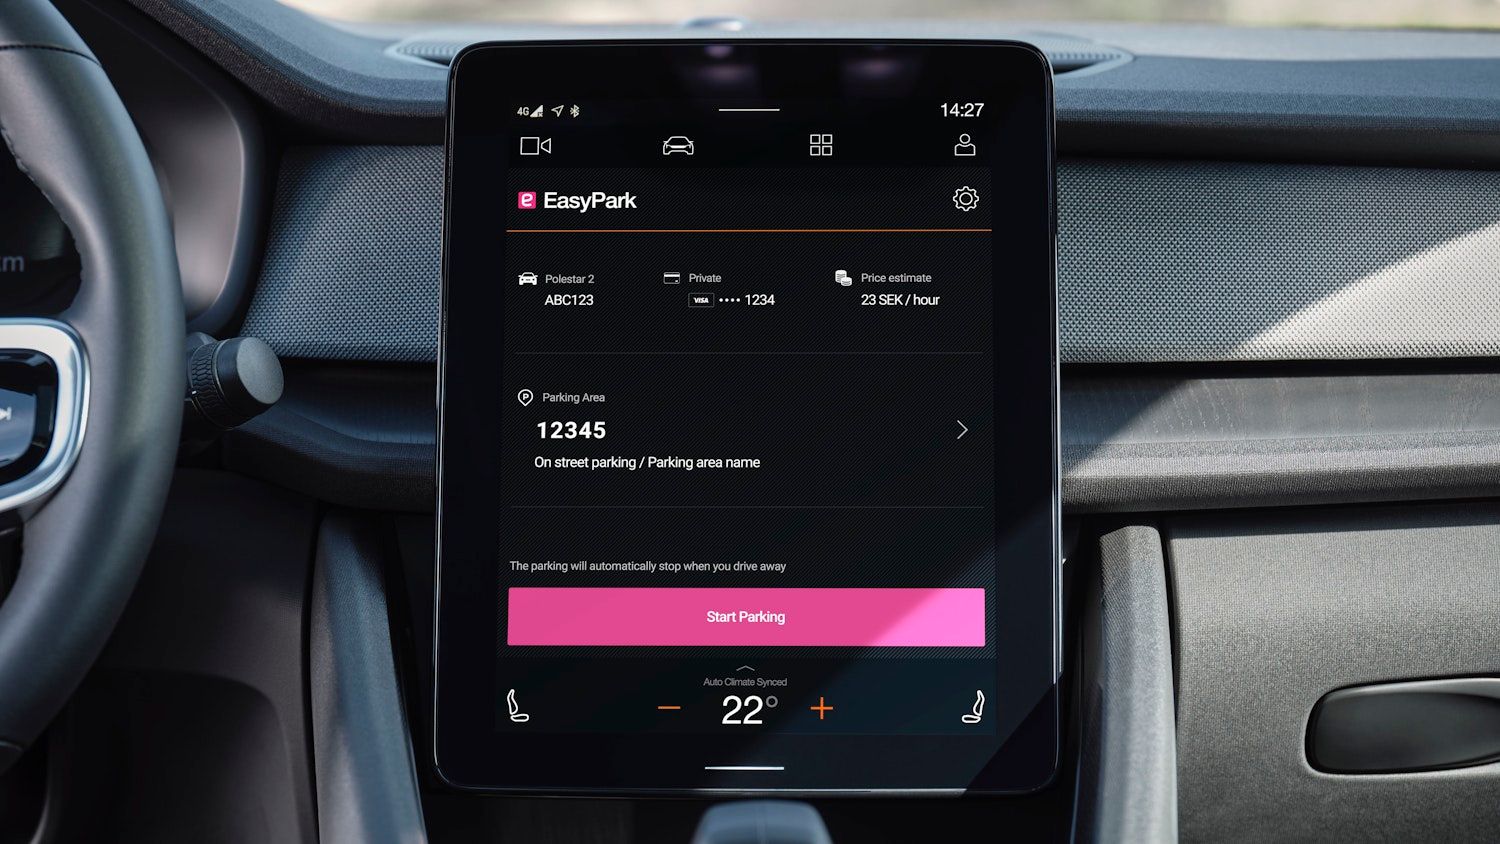 In-car display showing features of the EasyPark app